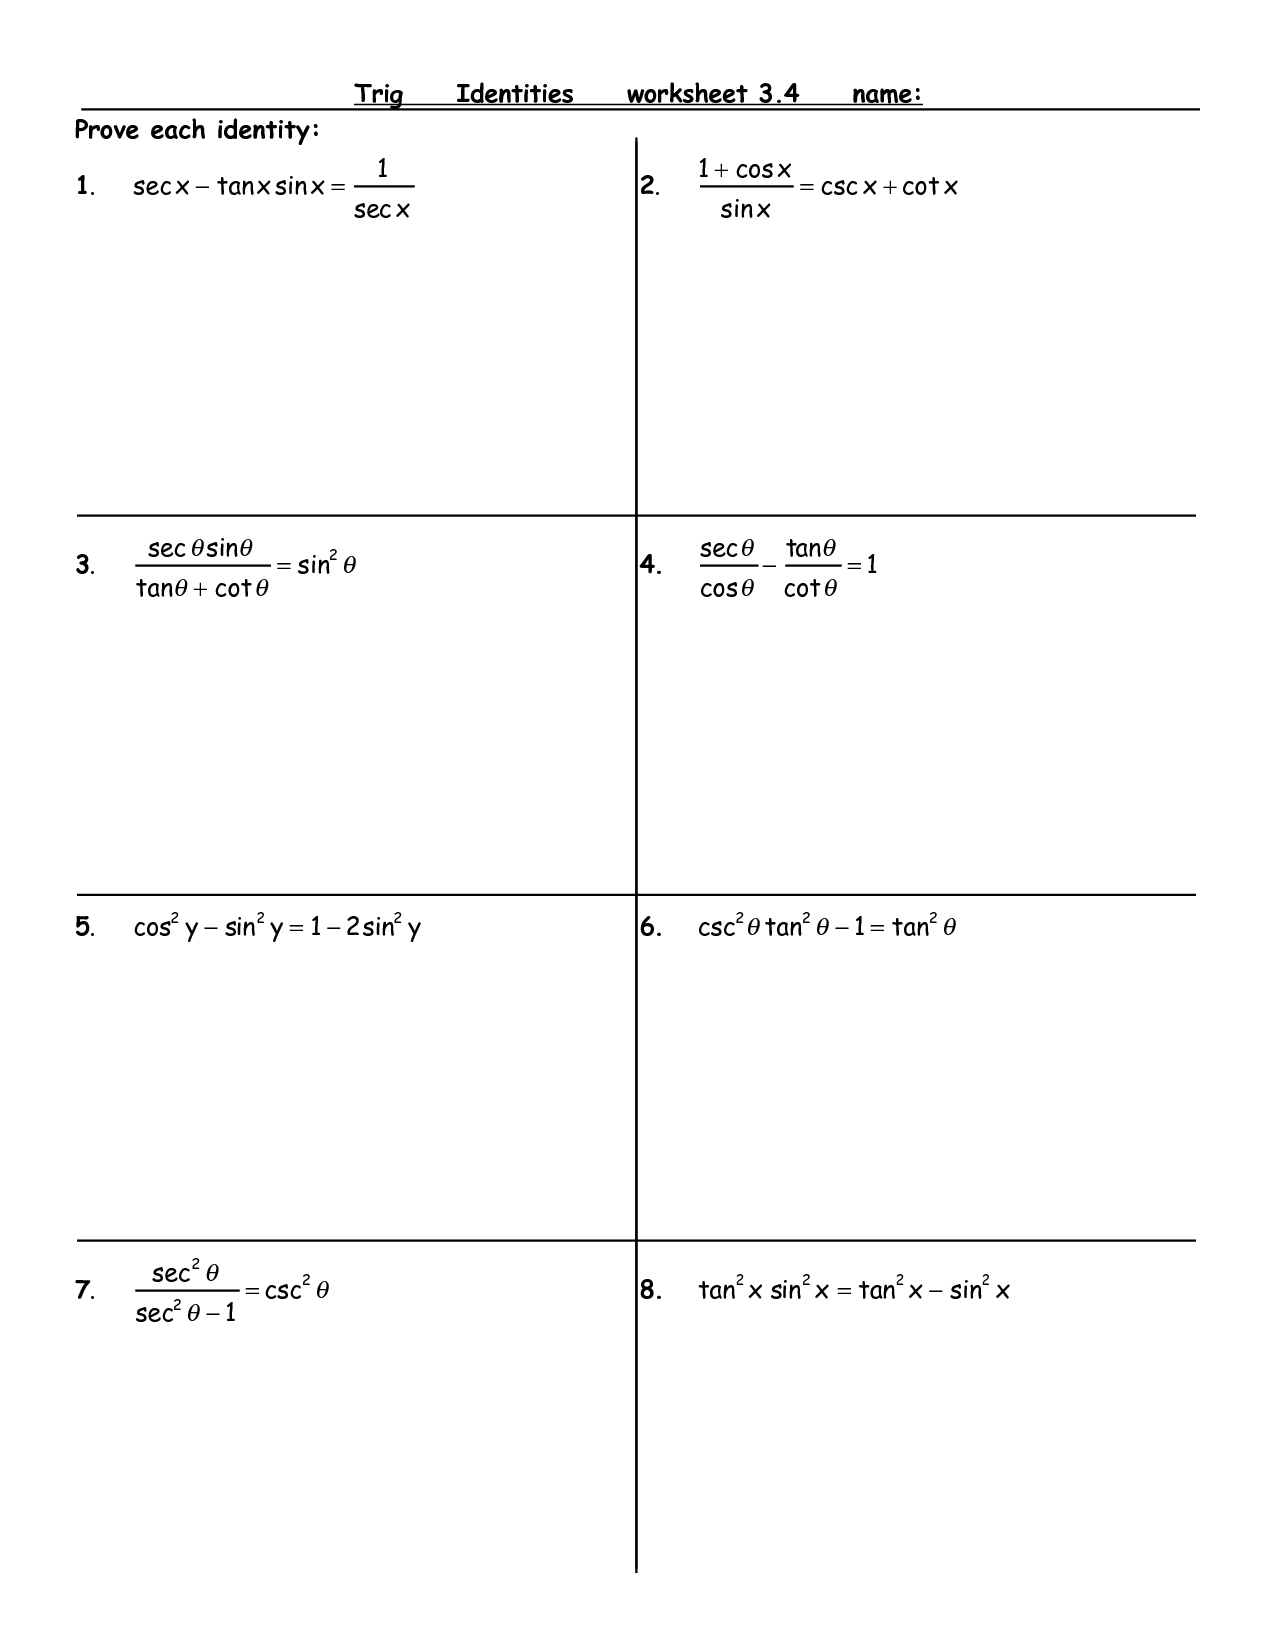 13-best-images-of-functions-worksheets-pdf-function-tables-worksheets-trig-identities